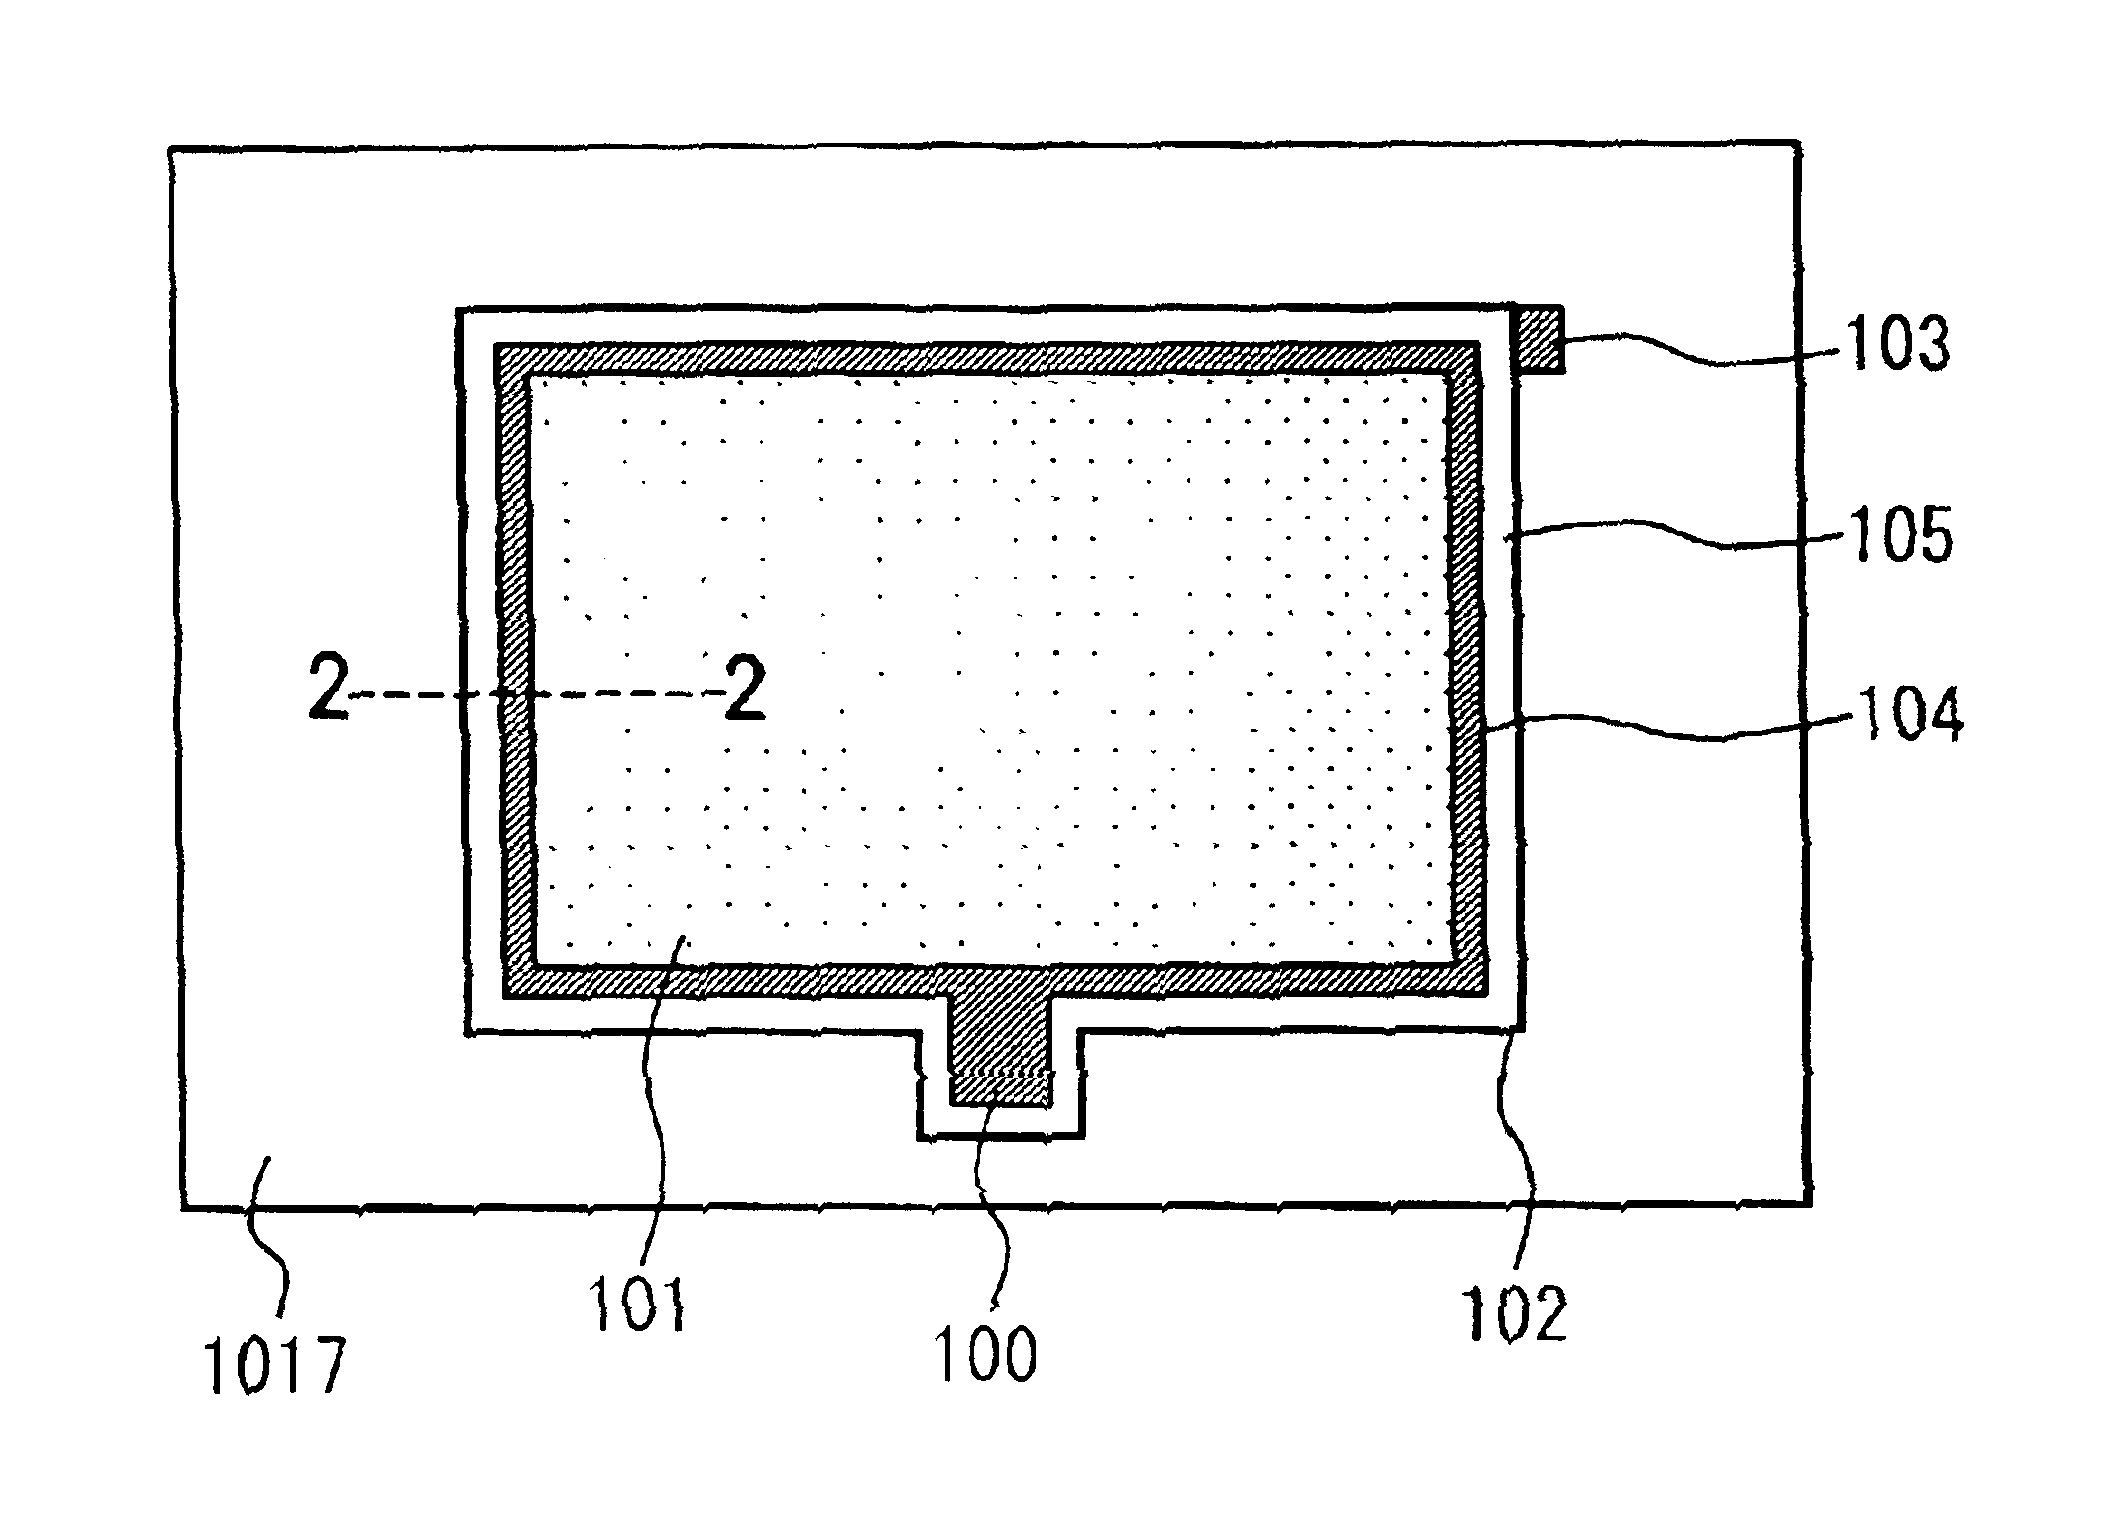 Image-forming apparatus and method of manufacturing the same